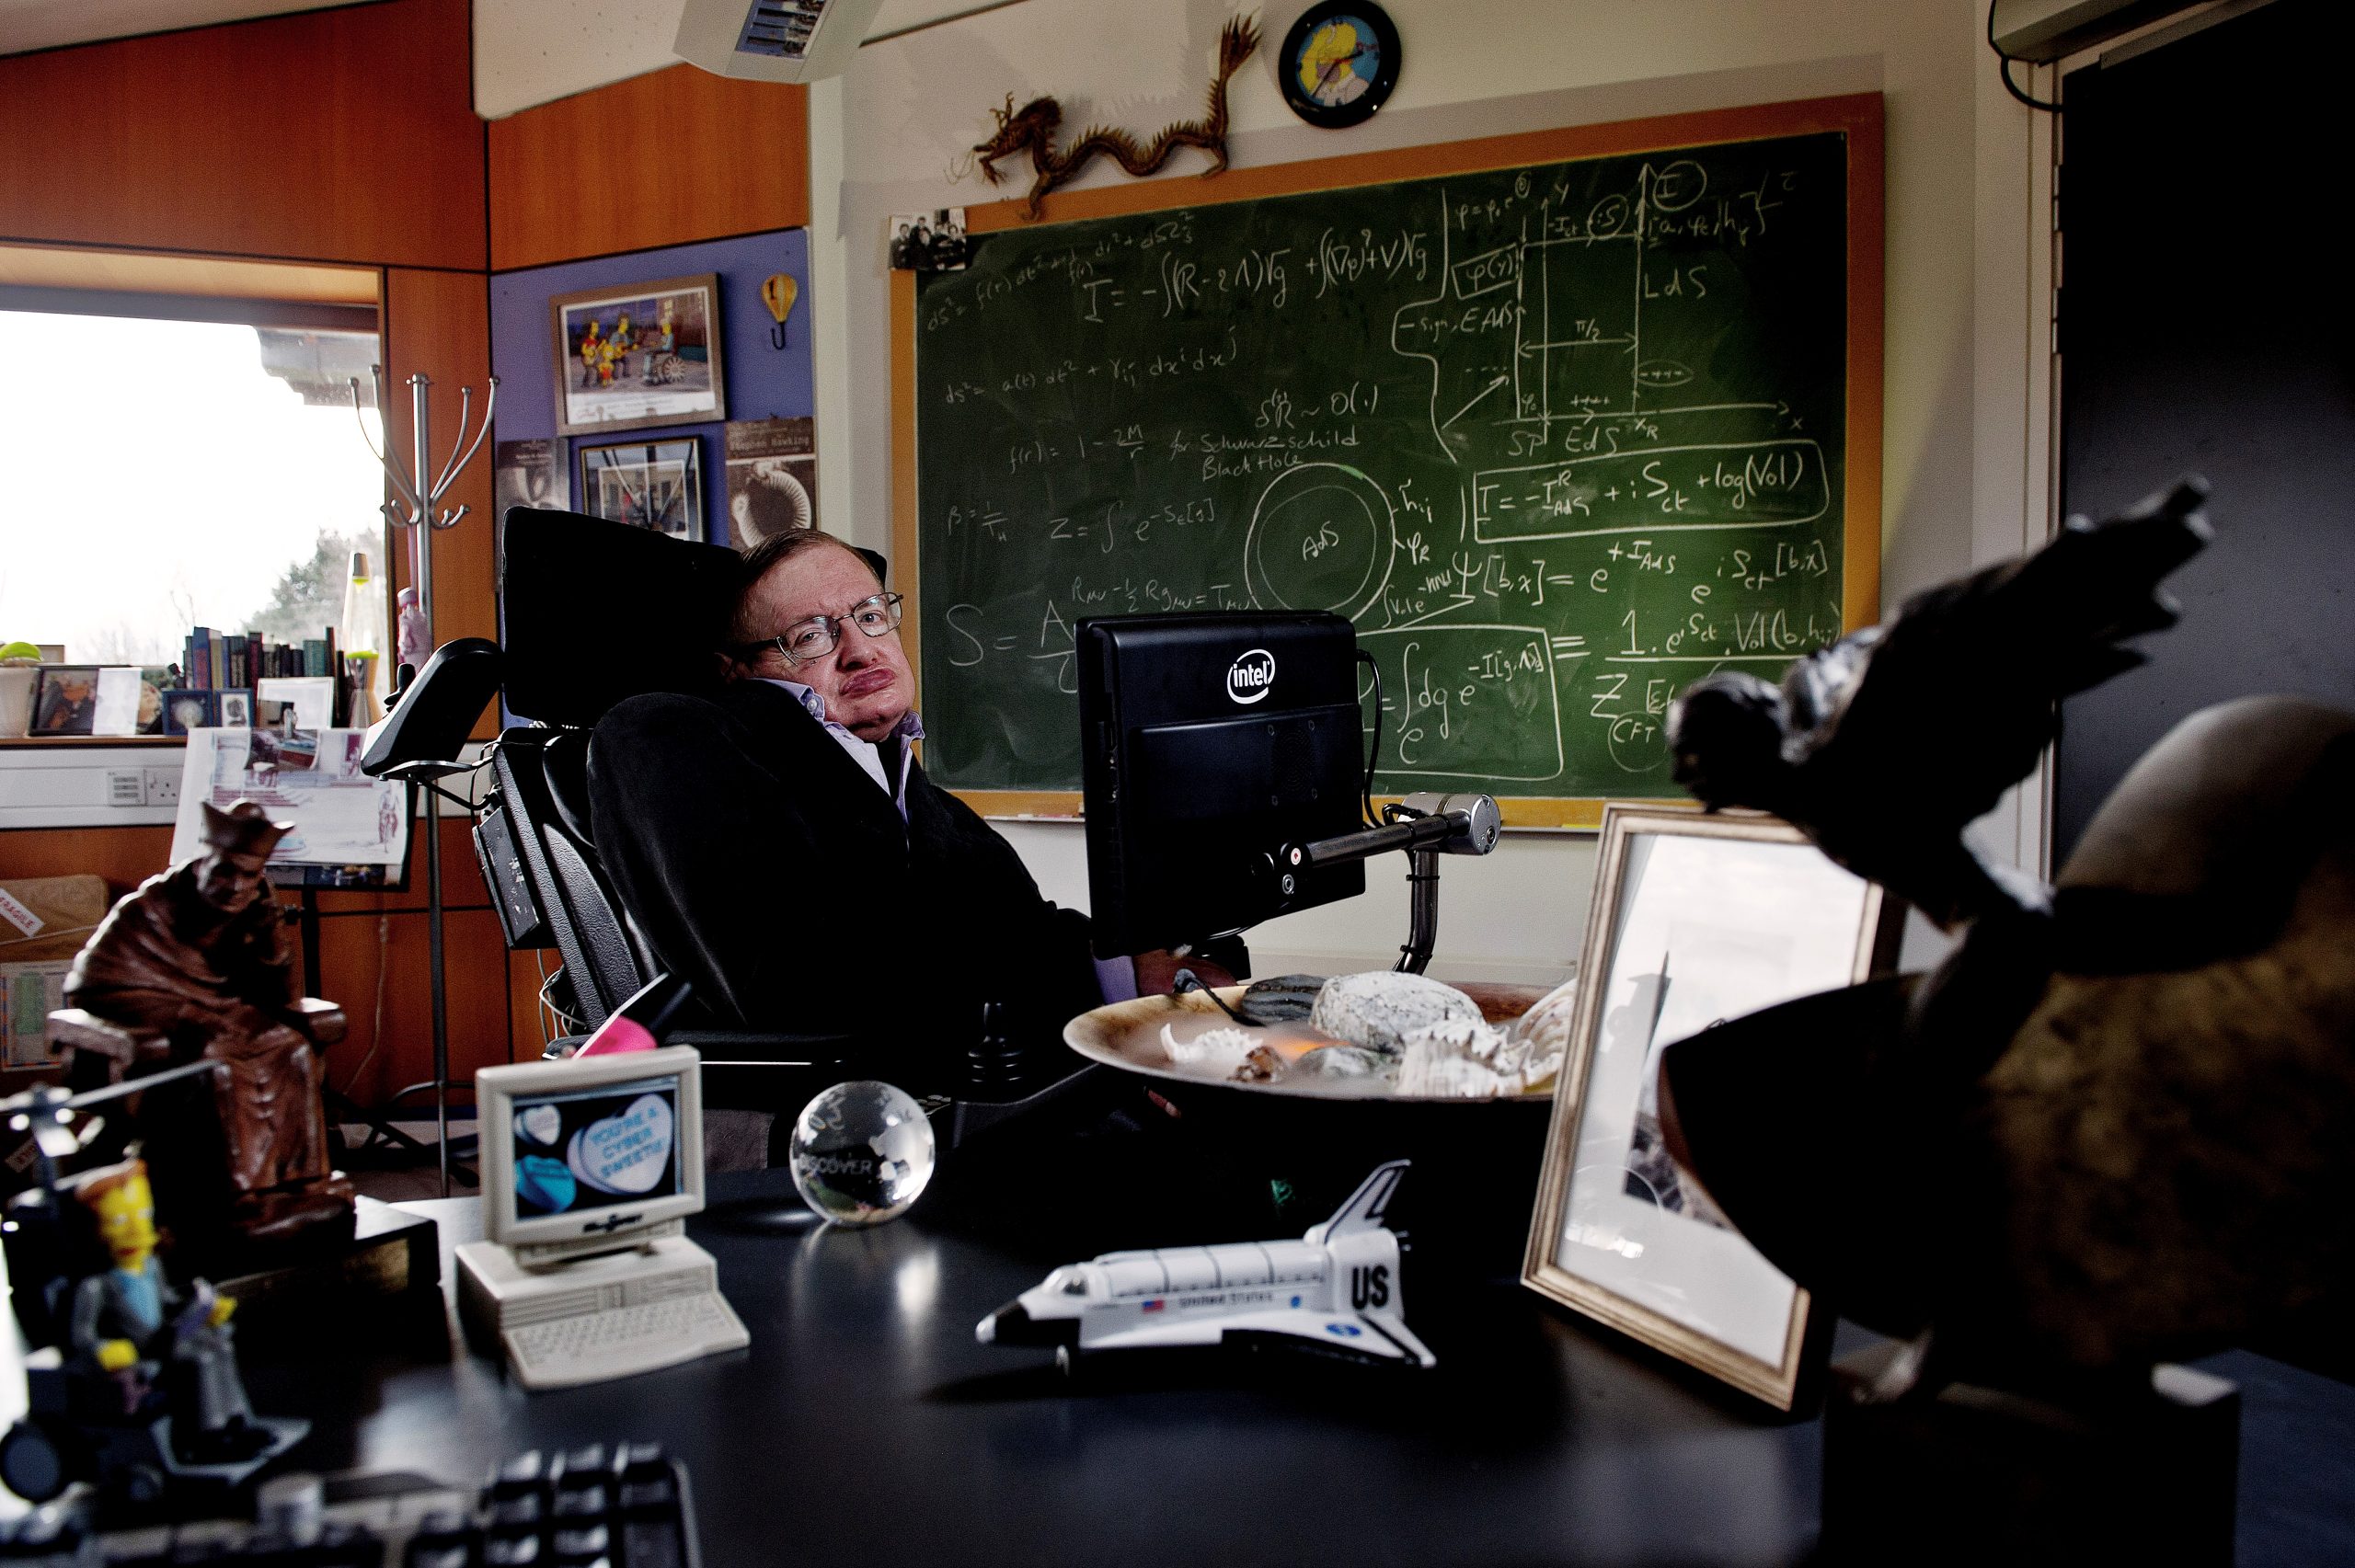 A Stephen Hawking exhibition is coming to Manchester this summer, The Manc